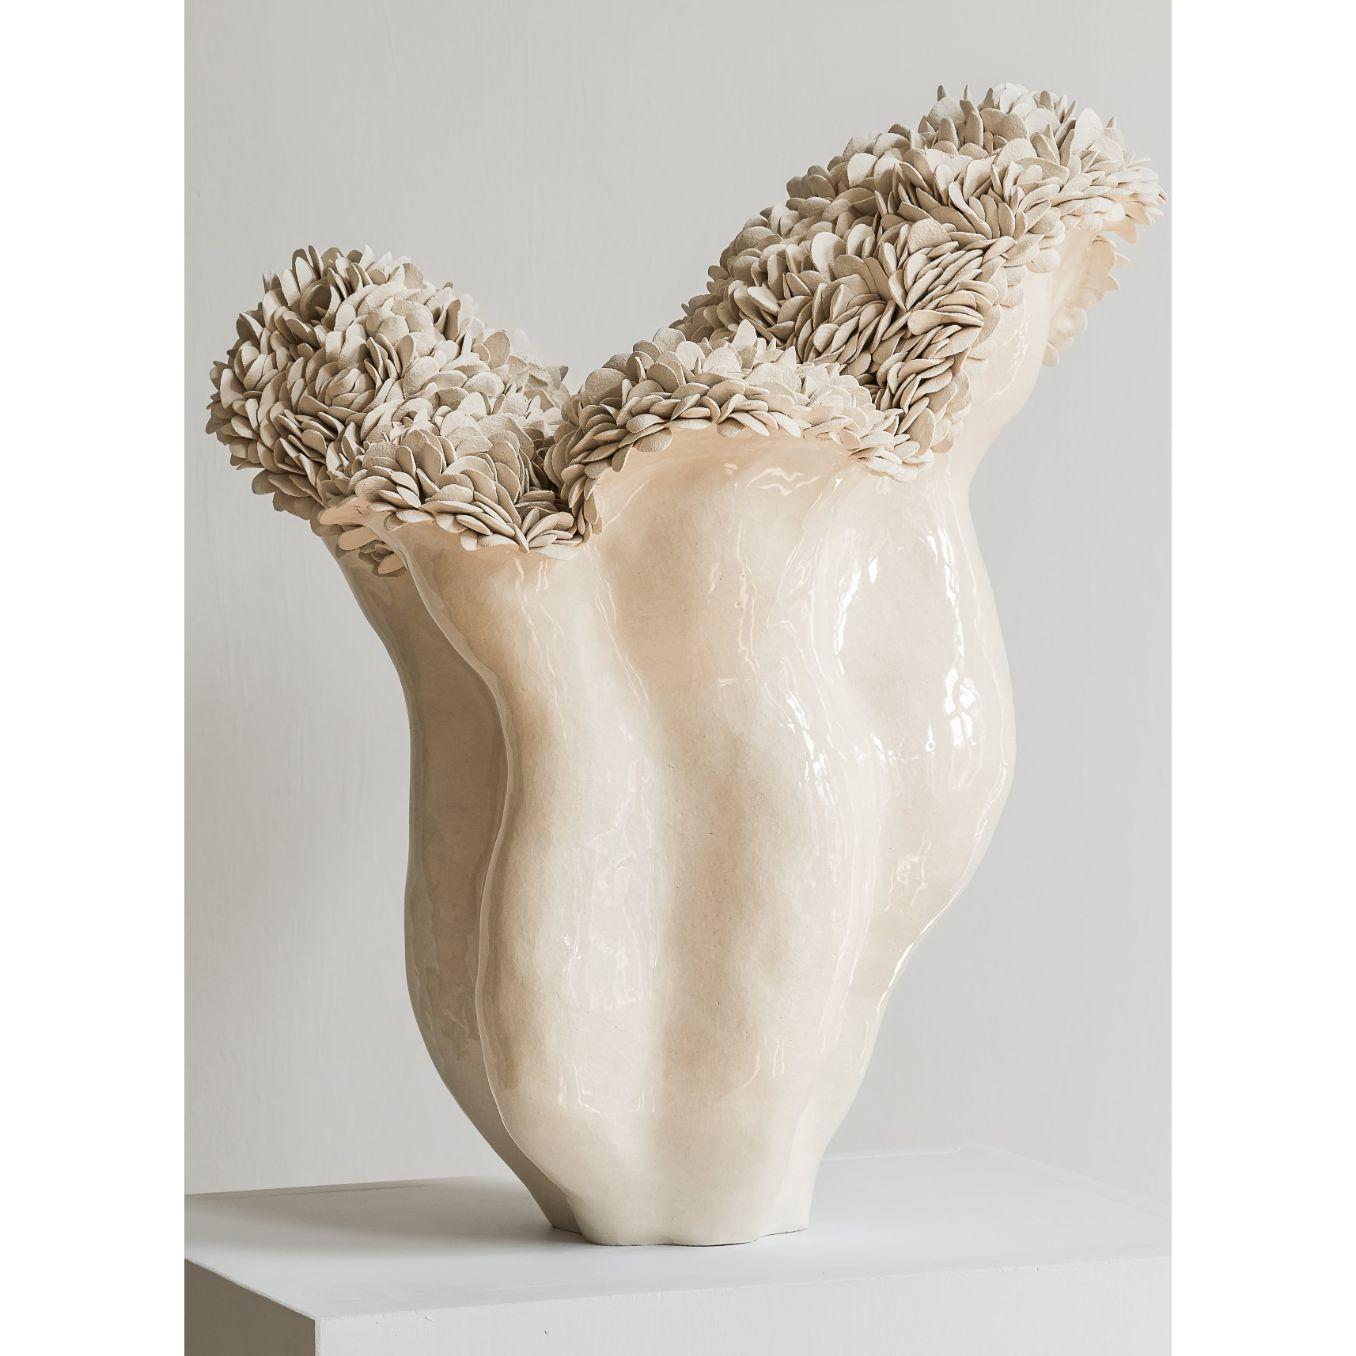 Nubes tall sculpture by Hanna Heino
Dimensions: D 35 x W 40 x H 50 cm
Materials: Handbuilt, stoneware clay, transparent glaze 
Also available in different dimensions. 


Hanna Heino is a contemporary clay artist from Finland known for her